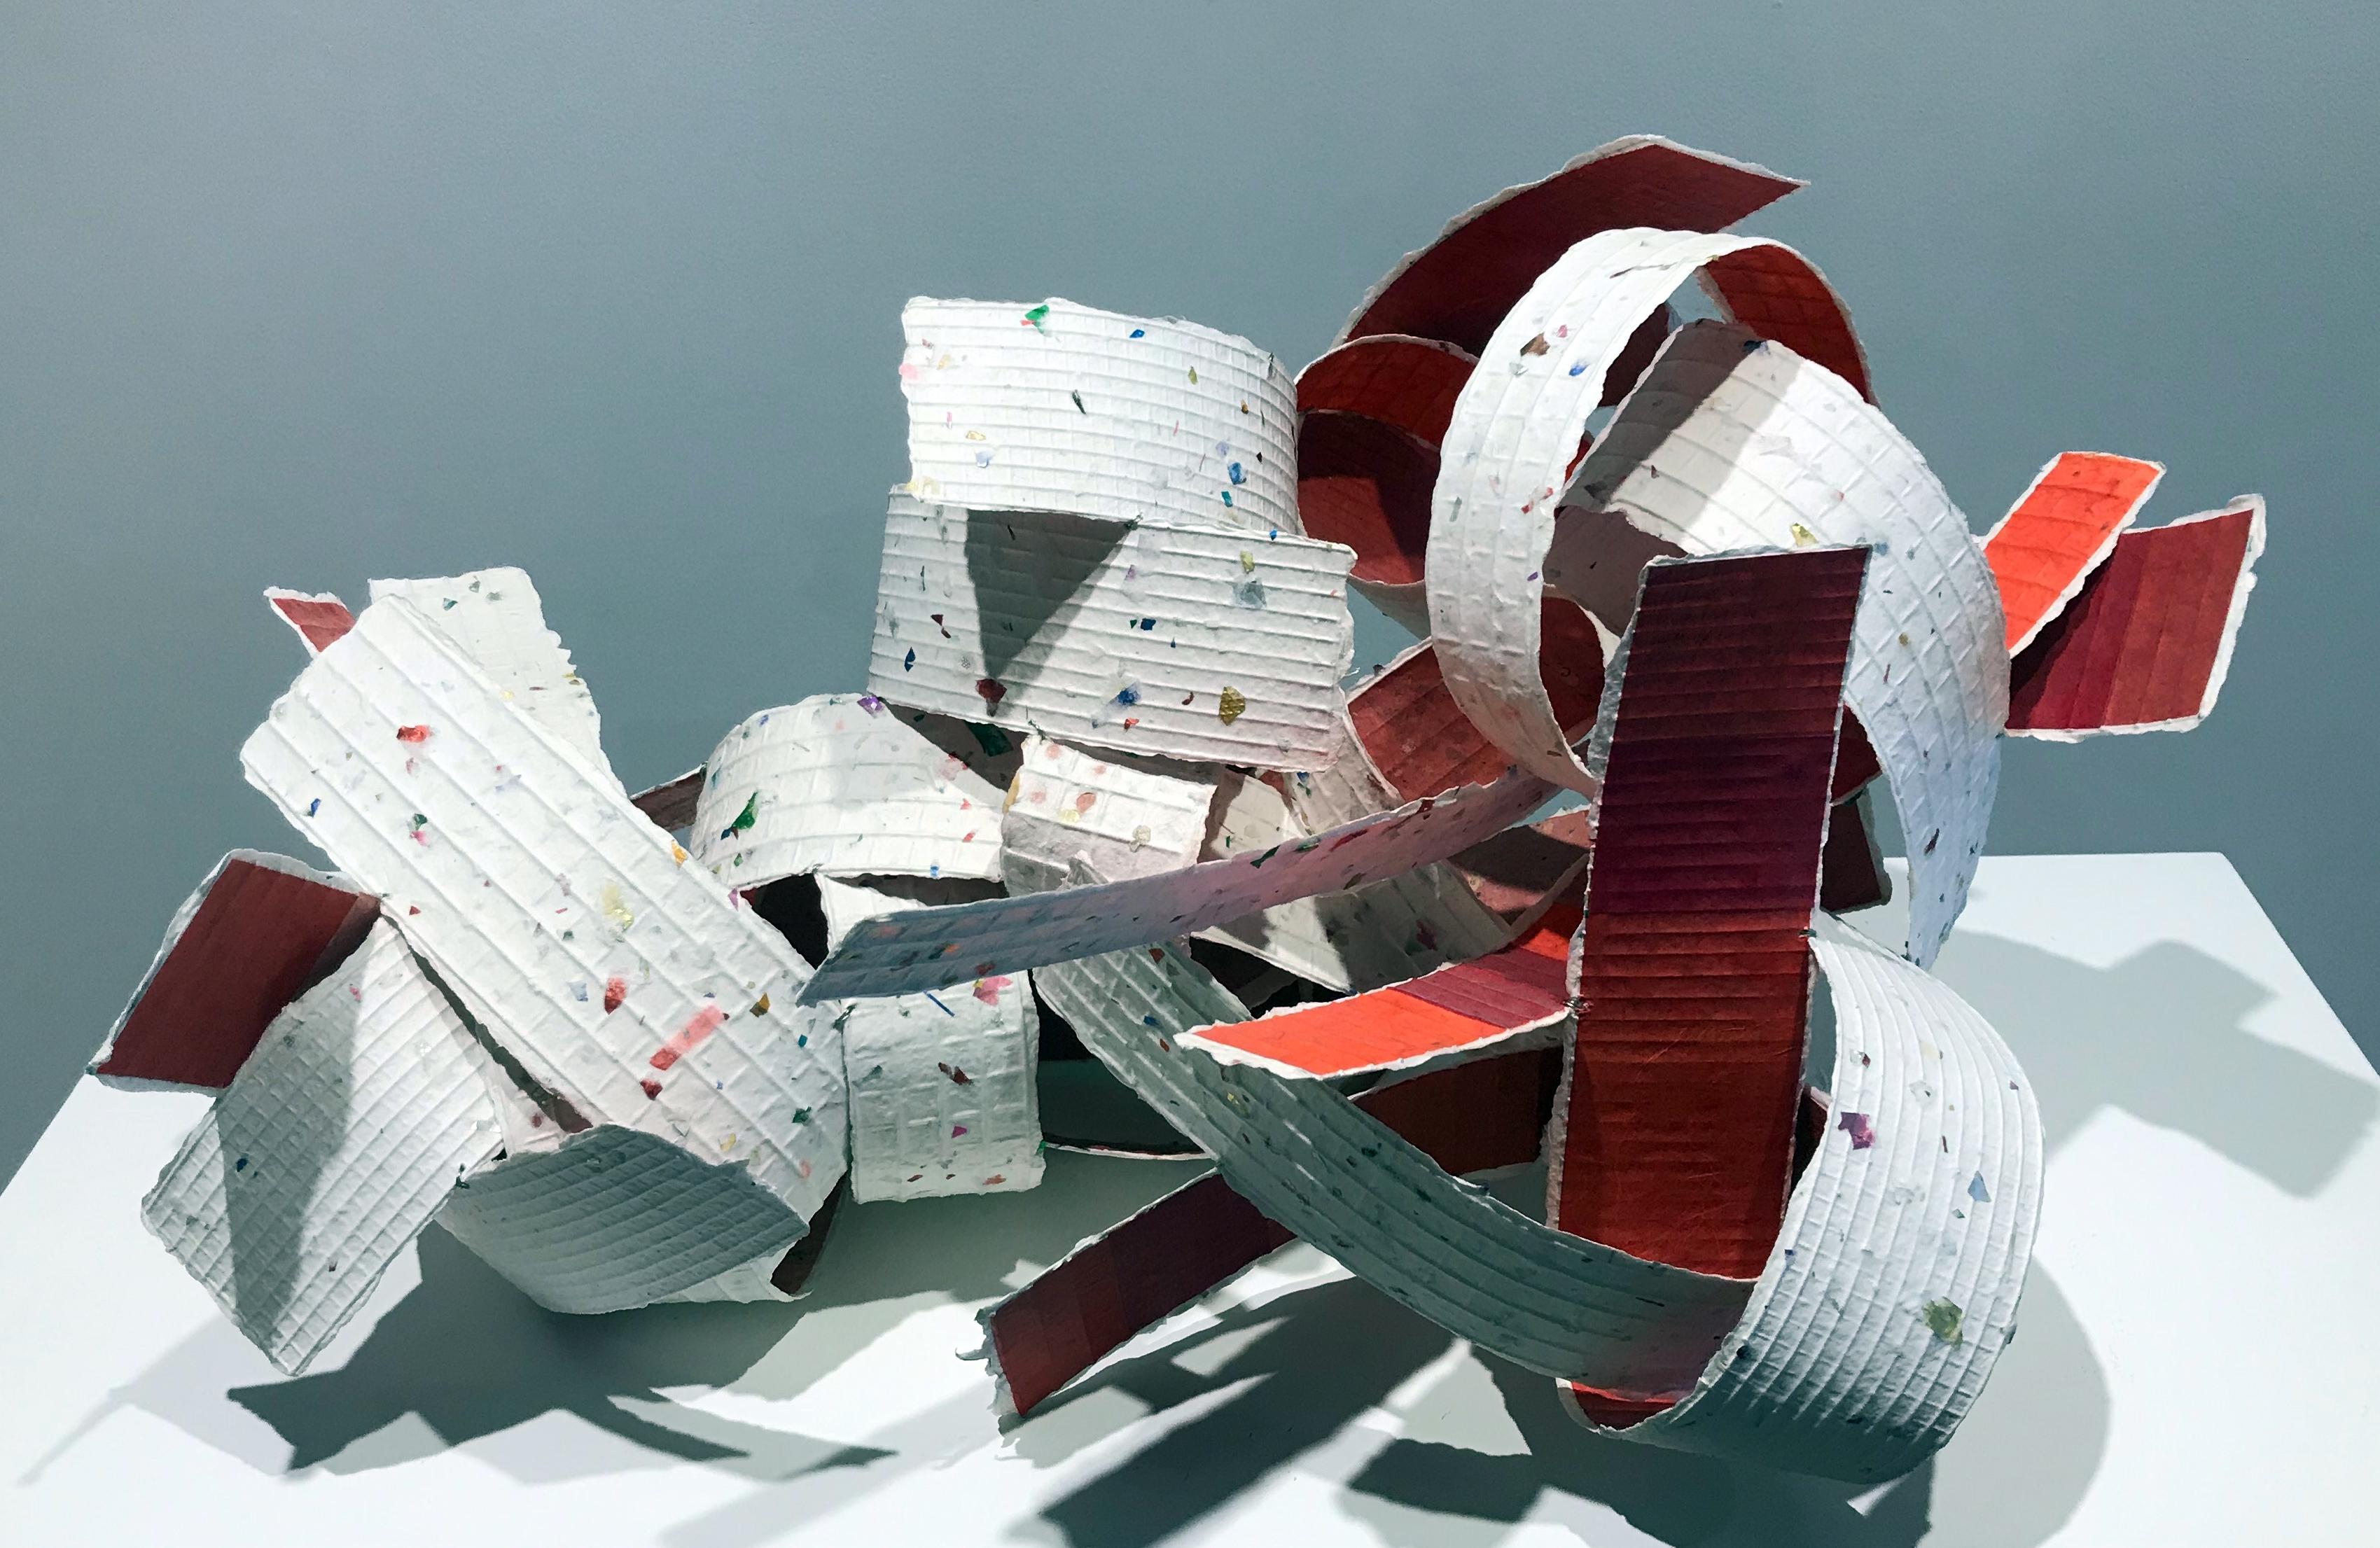 Confetti Dragon, Contemporary Sculpture with Hand Made and Commercial Papers 